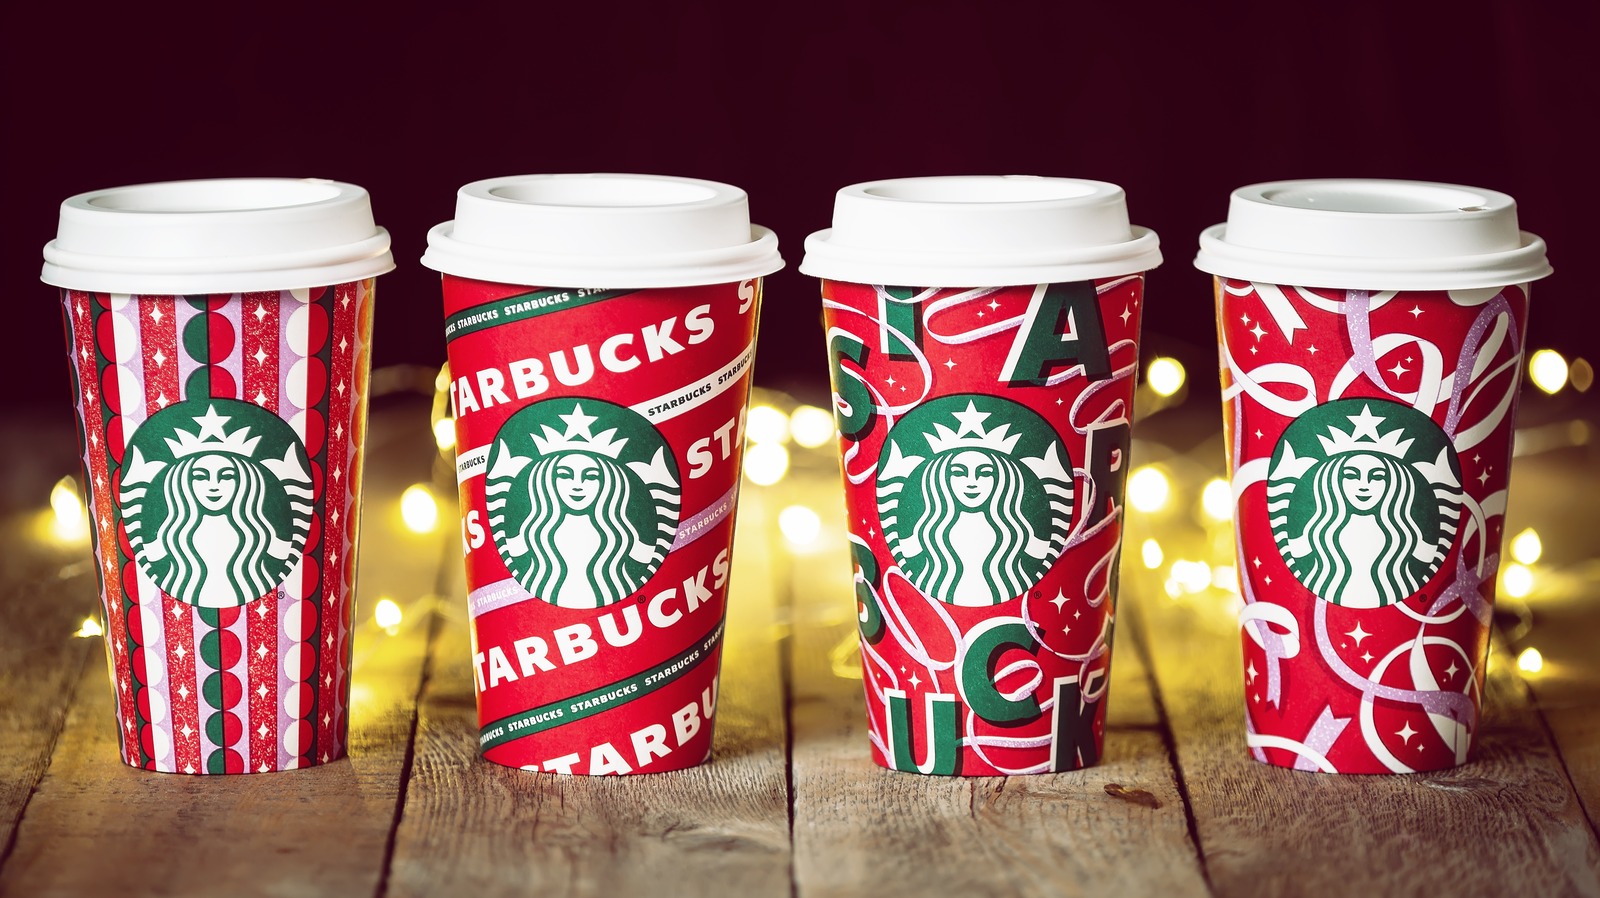 https://www.mashed.com/img/gallery/is-starbucks-open-on-christmas-2021/l-intro-1638467530.jpg